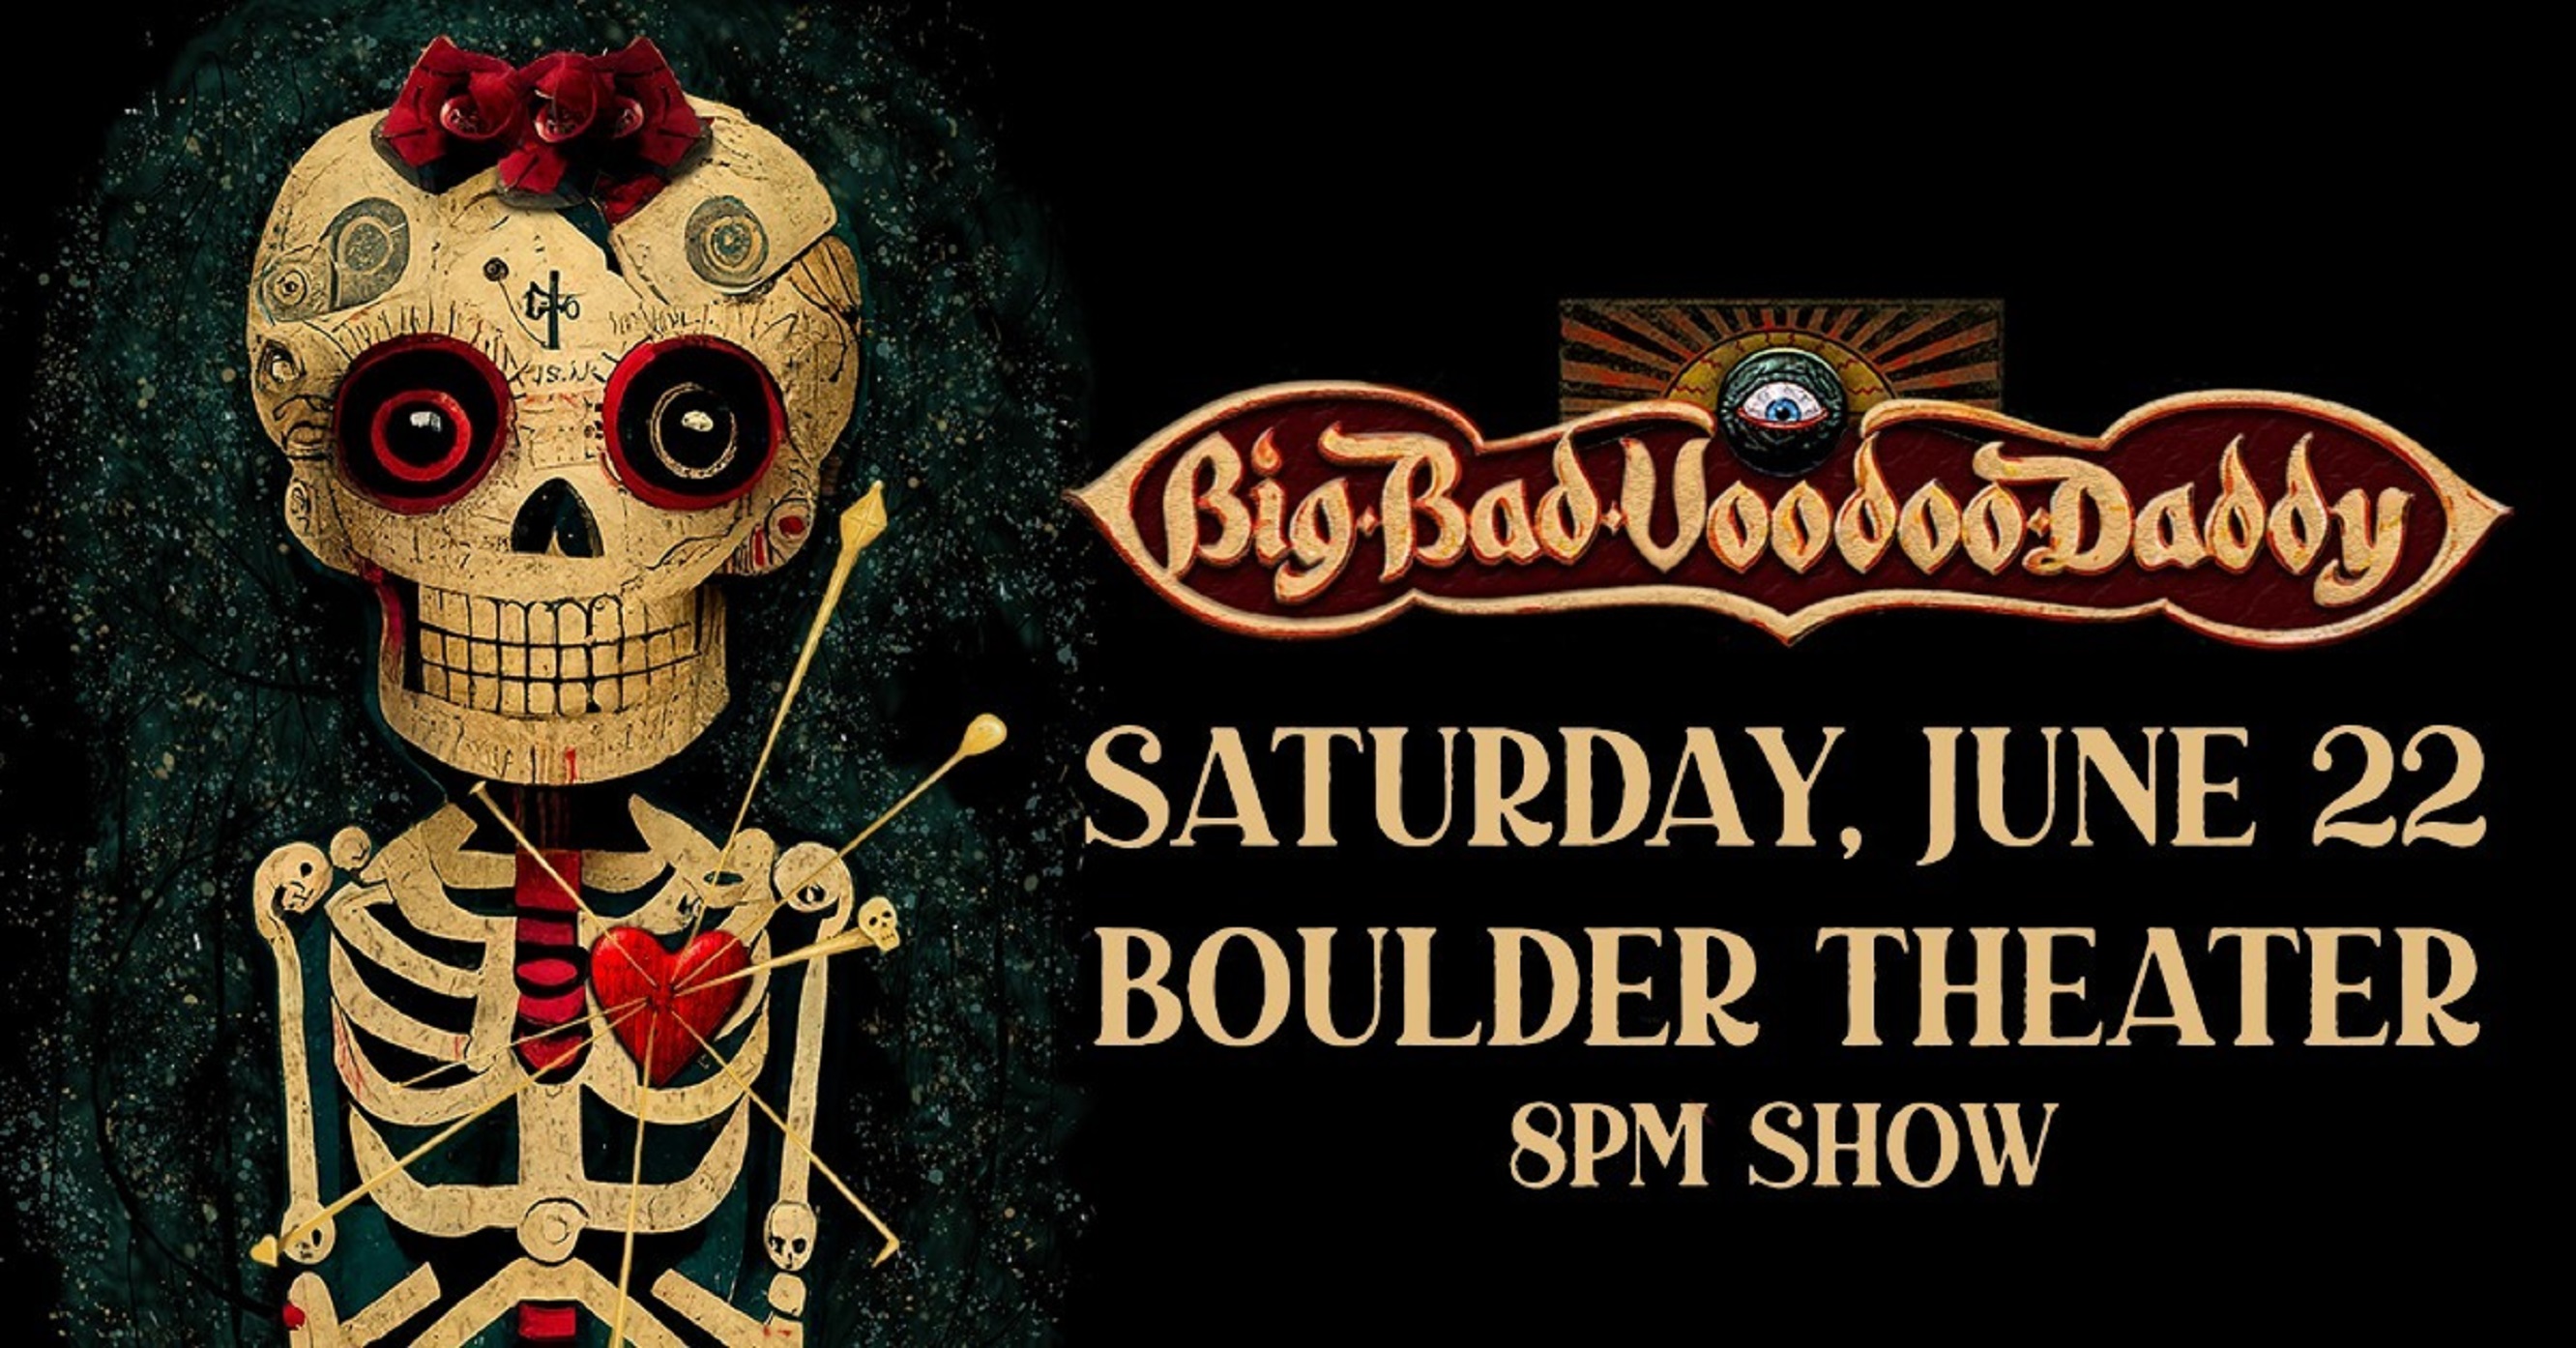 Big Bad Voodoo Daddy to Perform at Boulder Theater